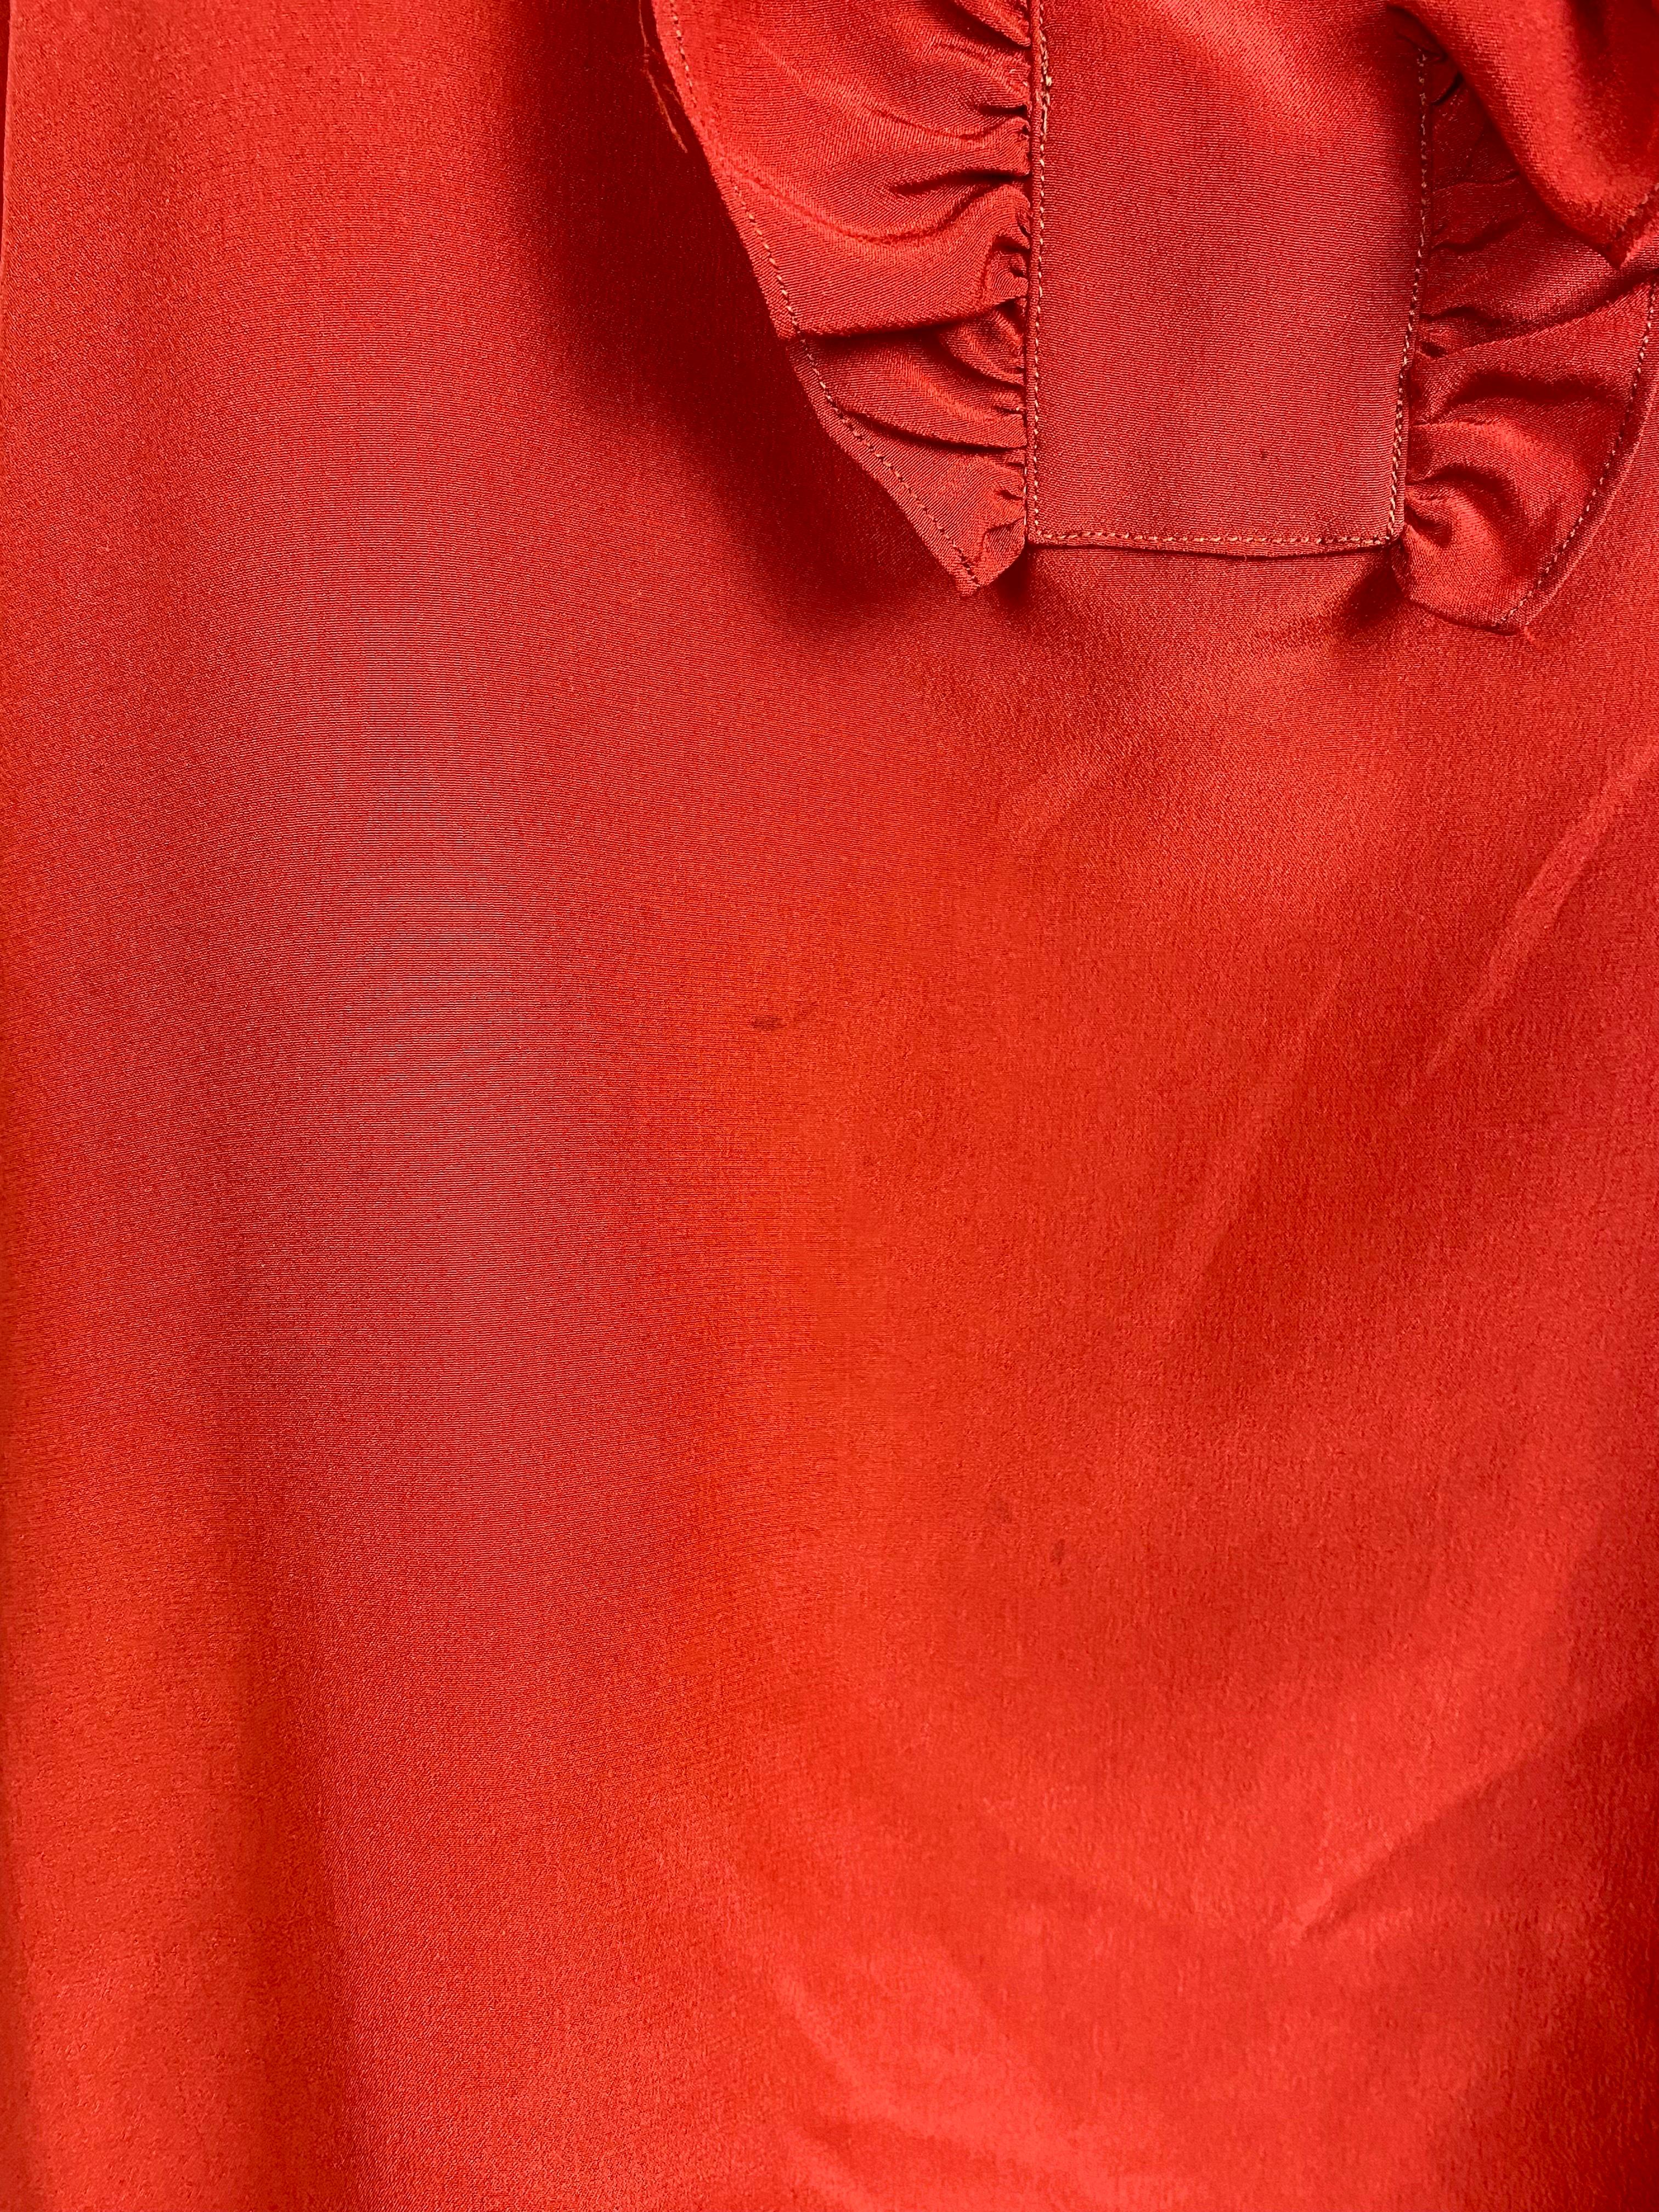 Vintage Yves saint Laurent Rive Gauche blouse from 1970. Cardinal Red. For Sale 7